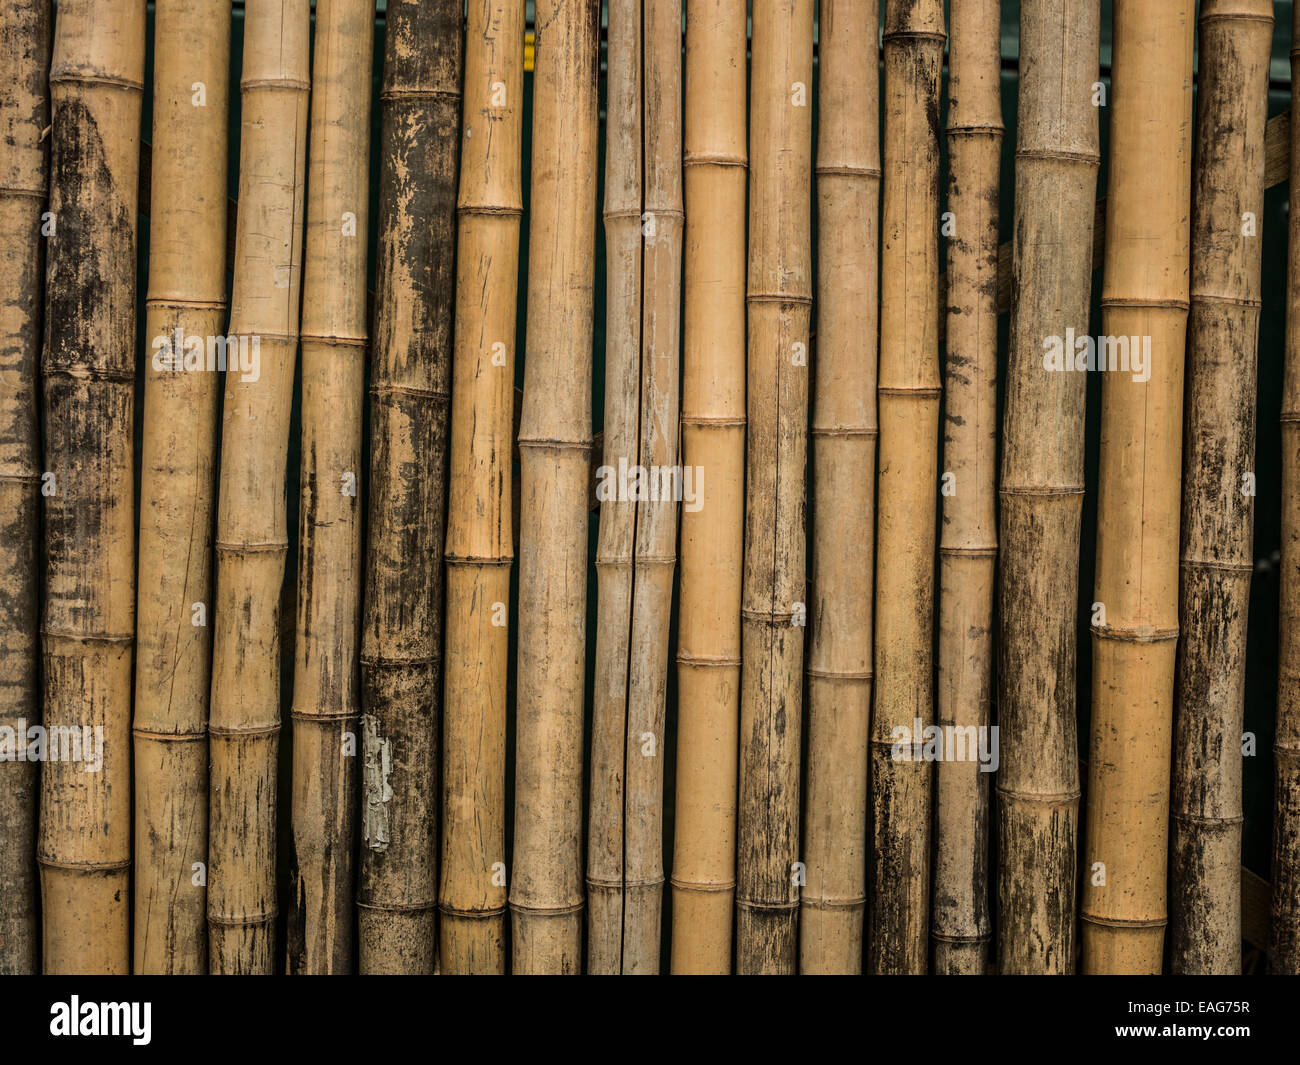 A bamboo fence. Stock Photo